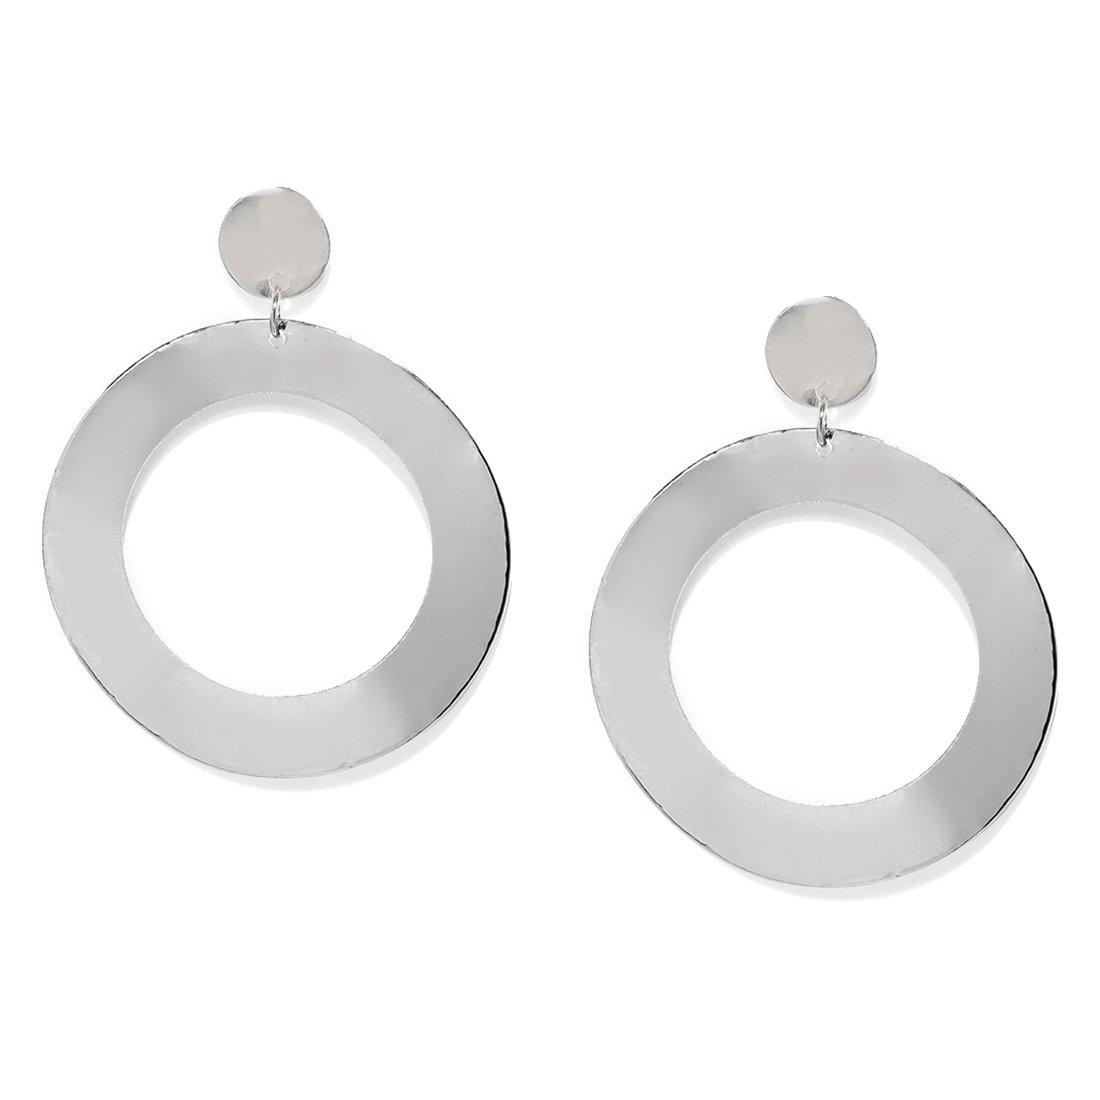 CONTEMPORARY CIRCULAR TWISTED DROP EARRINGS